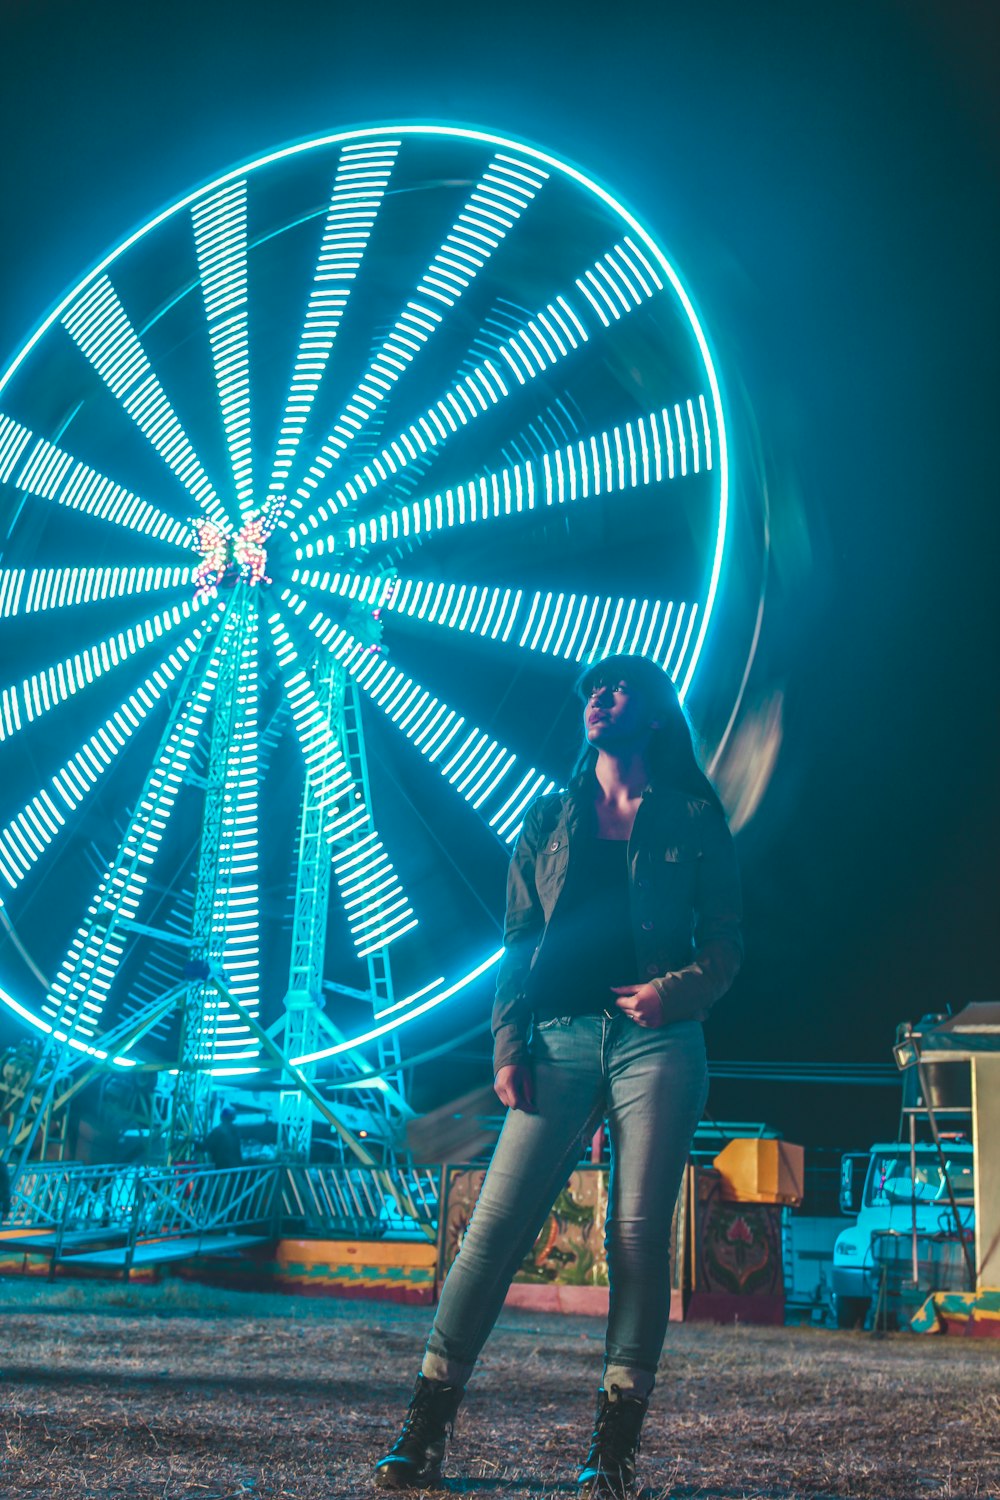 woman in black jacket and blue denim jeans standing near blue lighted ferris wheel during nighttime